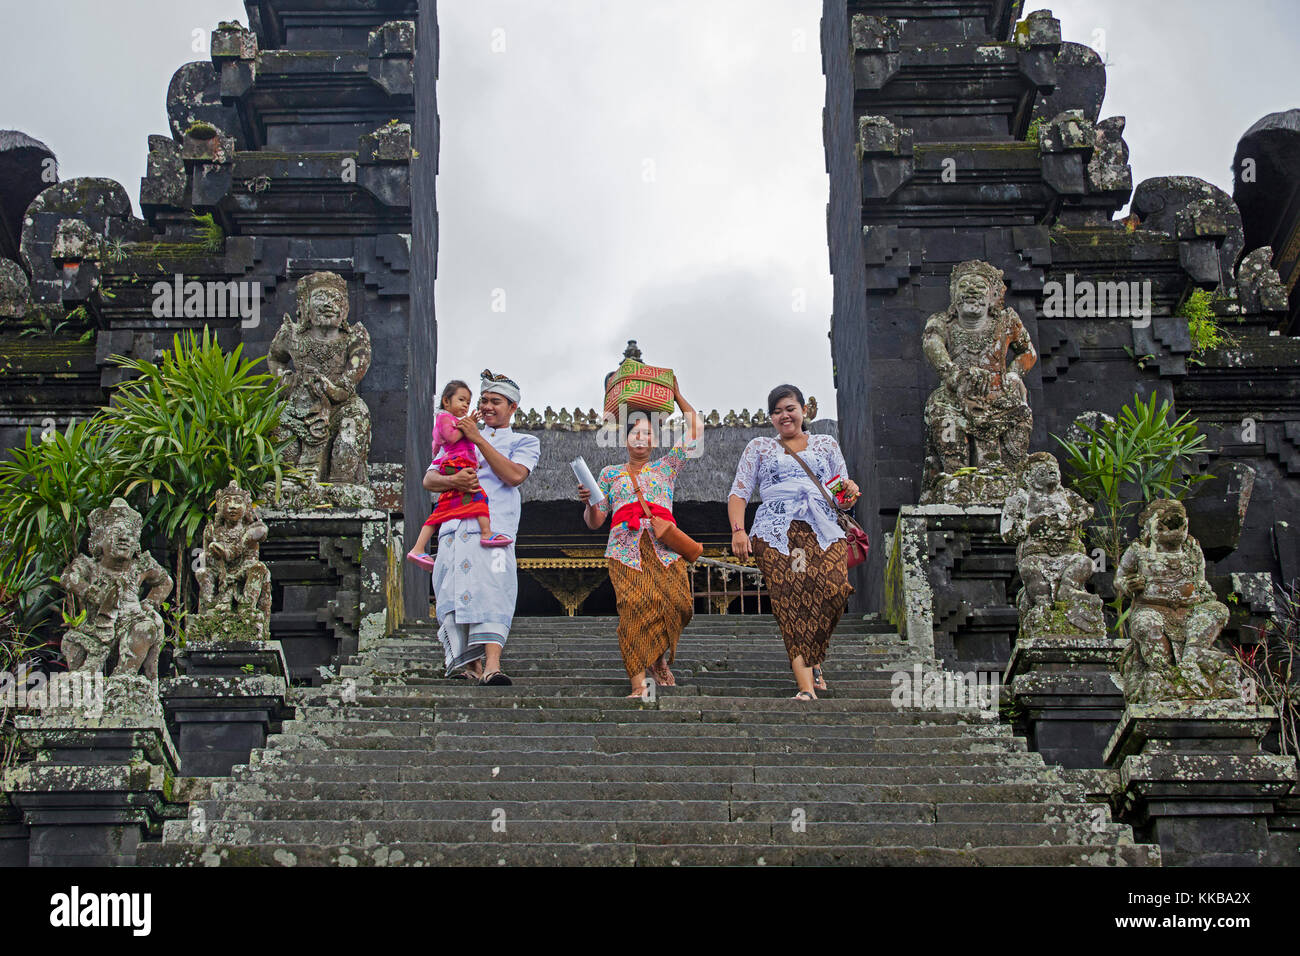 Indonesian tourists visiting Pura Besakih, largest and holiest temple of Hindu religion in Bali on the slopes of Mount Agung in Bali, Indonesia Stock Photo